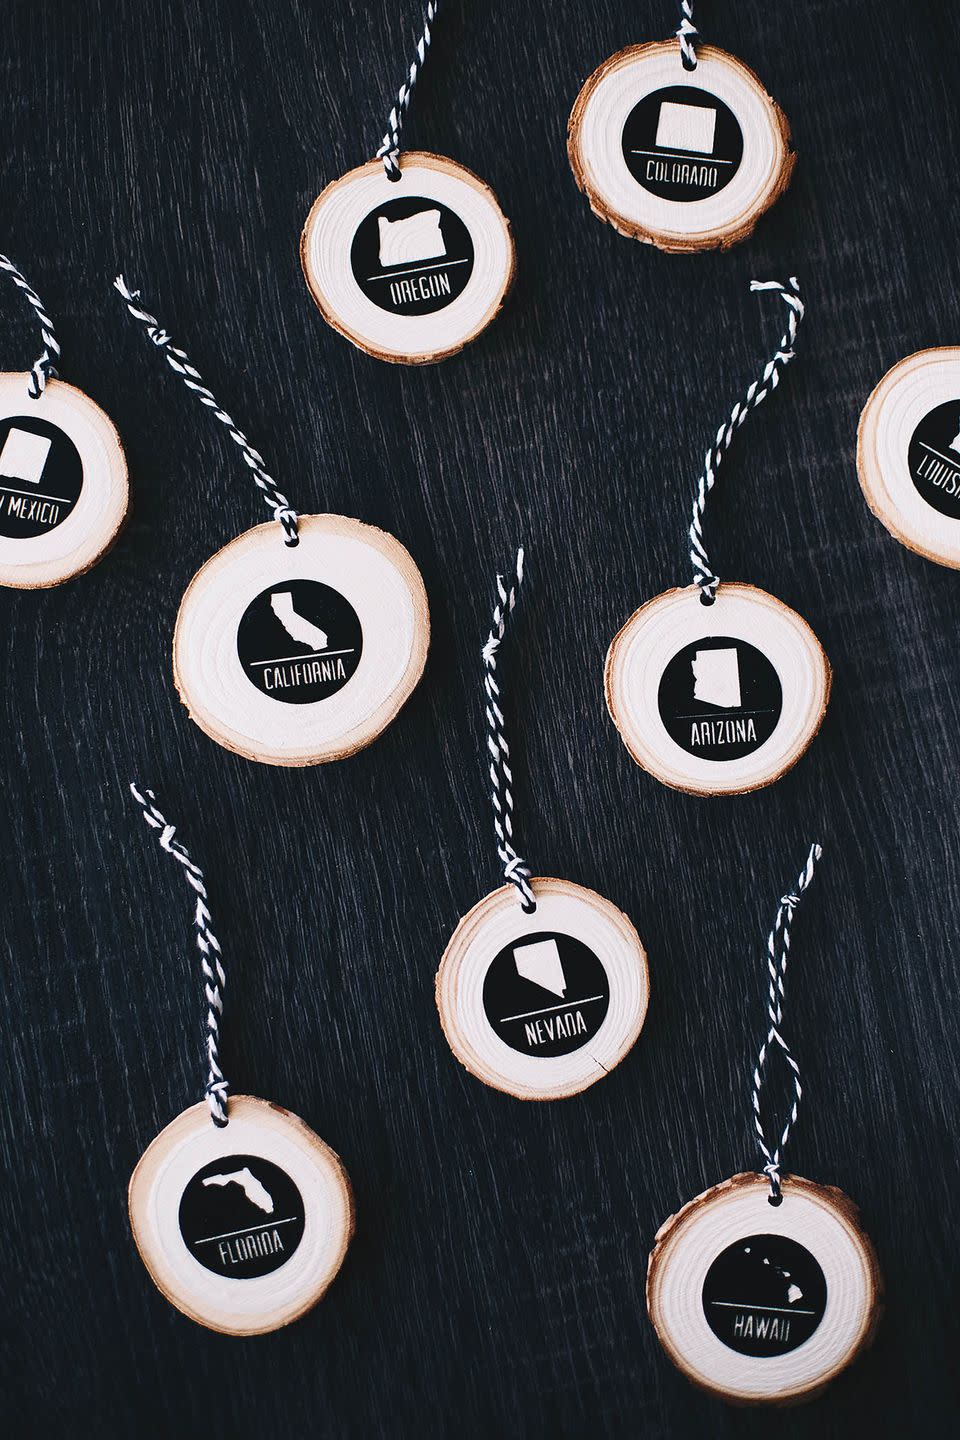 <p>Celebrate your family's travels with these ornaments that have painted state decals on each wood slice. We think these also make the perfect gift for friends or family who travel often—and it doesn't have to be limited to states!</p><p><strong>Get the tutorial at <a href="https://allforthememories.com/sponsored-easing-in-to-the-holiday-decor-diy-modern-travel-ornament/" rel="nofollow noopener" target="_blank" data-ylk="slk:All for the Memories" class="link ">All for the Memories</a>.</strong></p><p><strong><a class="link " href="https://www.amazon.com/Fuyit-Unfinished-Predrilled-Christmas-Ornaments/dp/B078HB4ZD7/ref=sr_1_4?tag=syn-yahoo-20&ascsubtag=%5Bartid%7C10050.g.1070%5Bsrc%7Cyahoo-us" rel="nofollow noopener" target="_blank" data-ylk="slk:SHOP WOOD SLICES">SHOP WOOD SLICES</a><br></strong></p>